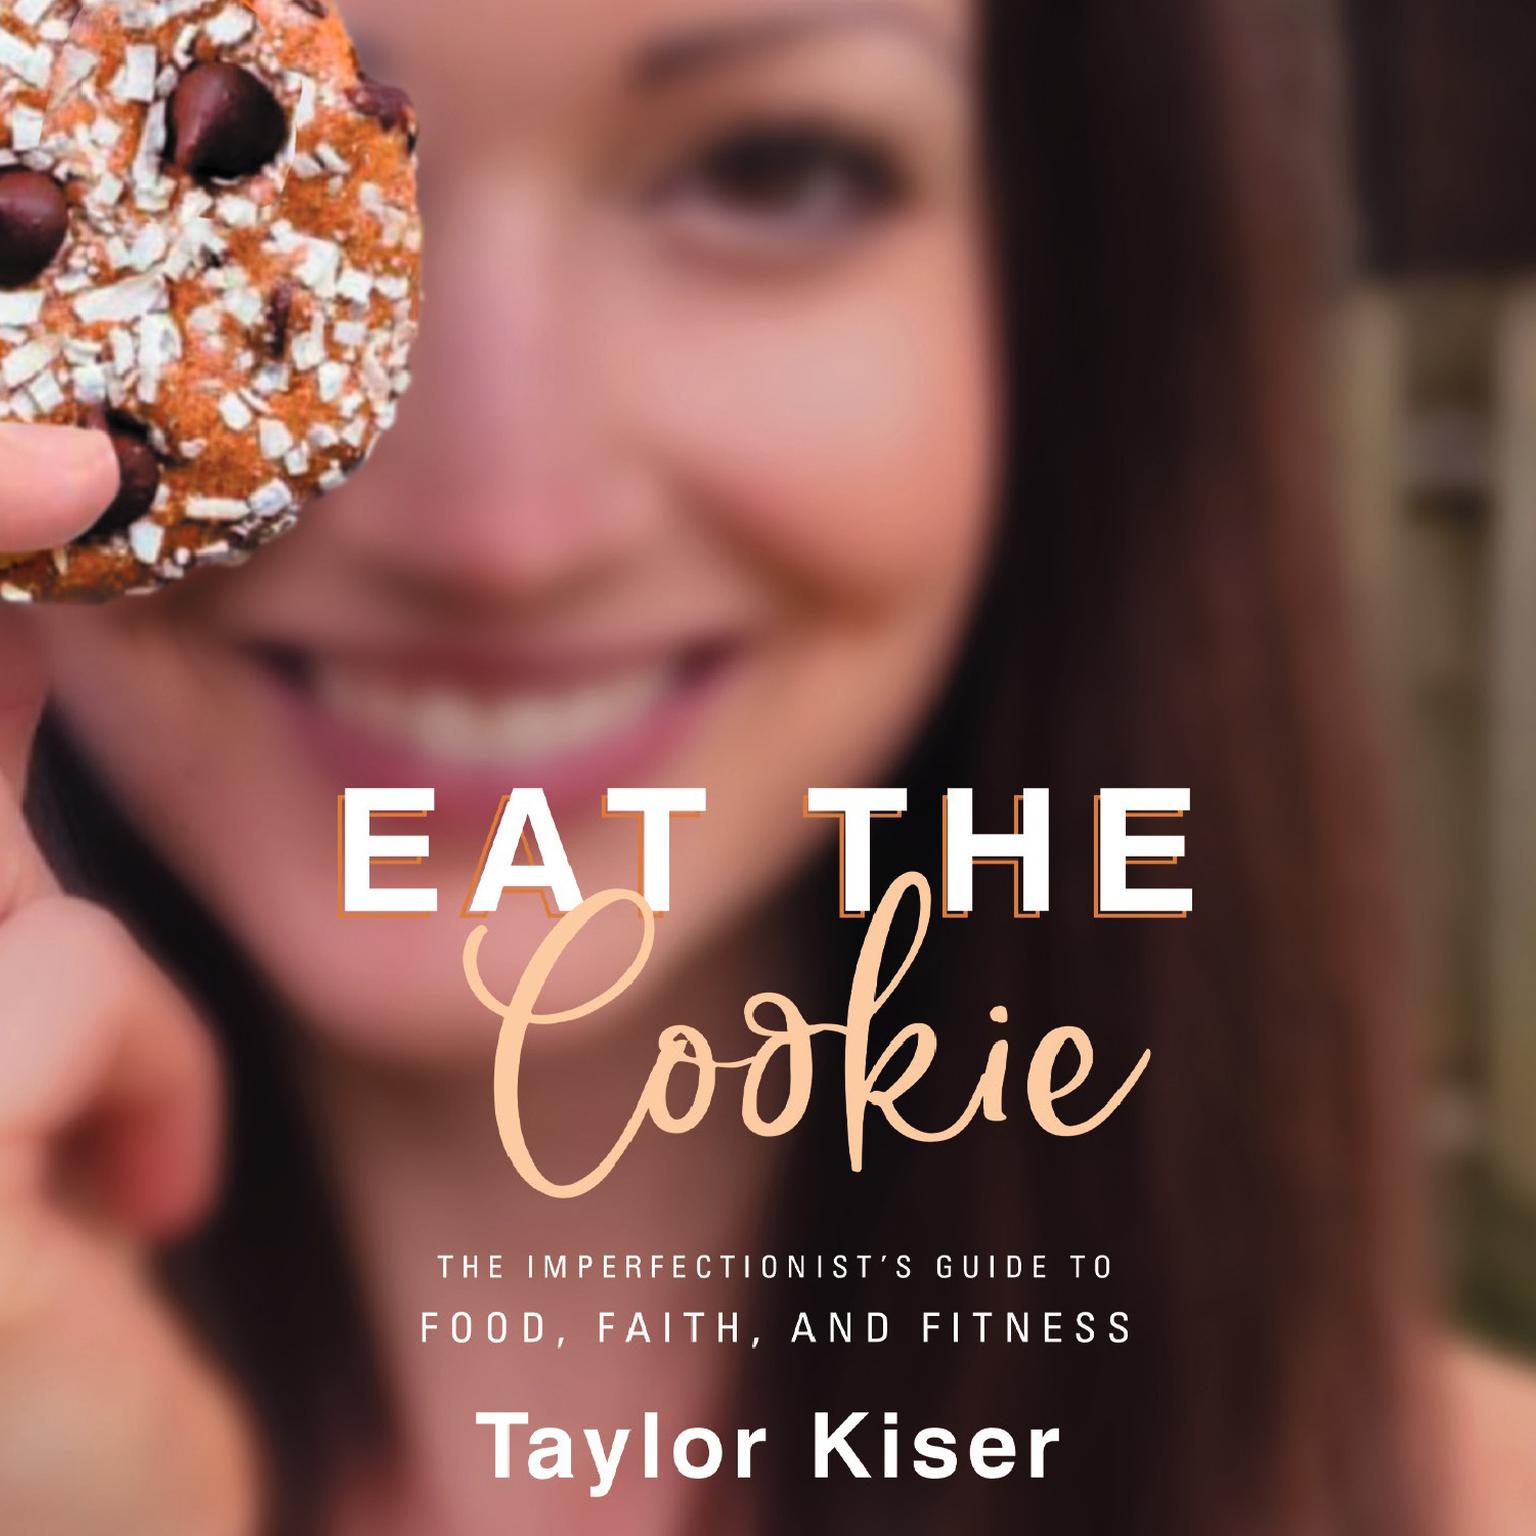 Eat the Cookie: The Imperfectionist’s Guide to Food, Faith, and Fitness Audiobook, by Taylor Kiser